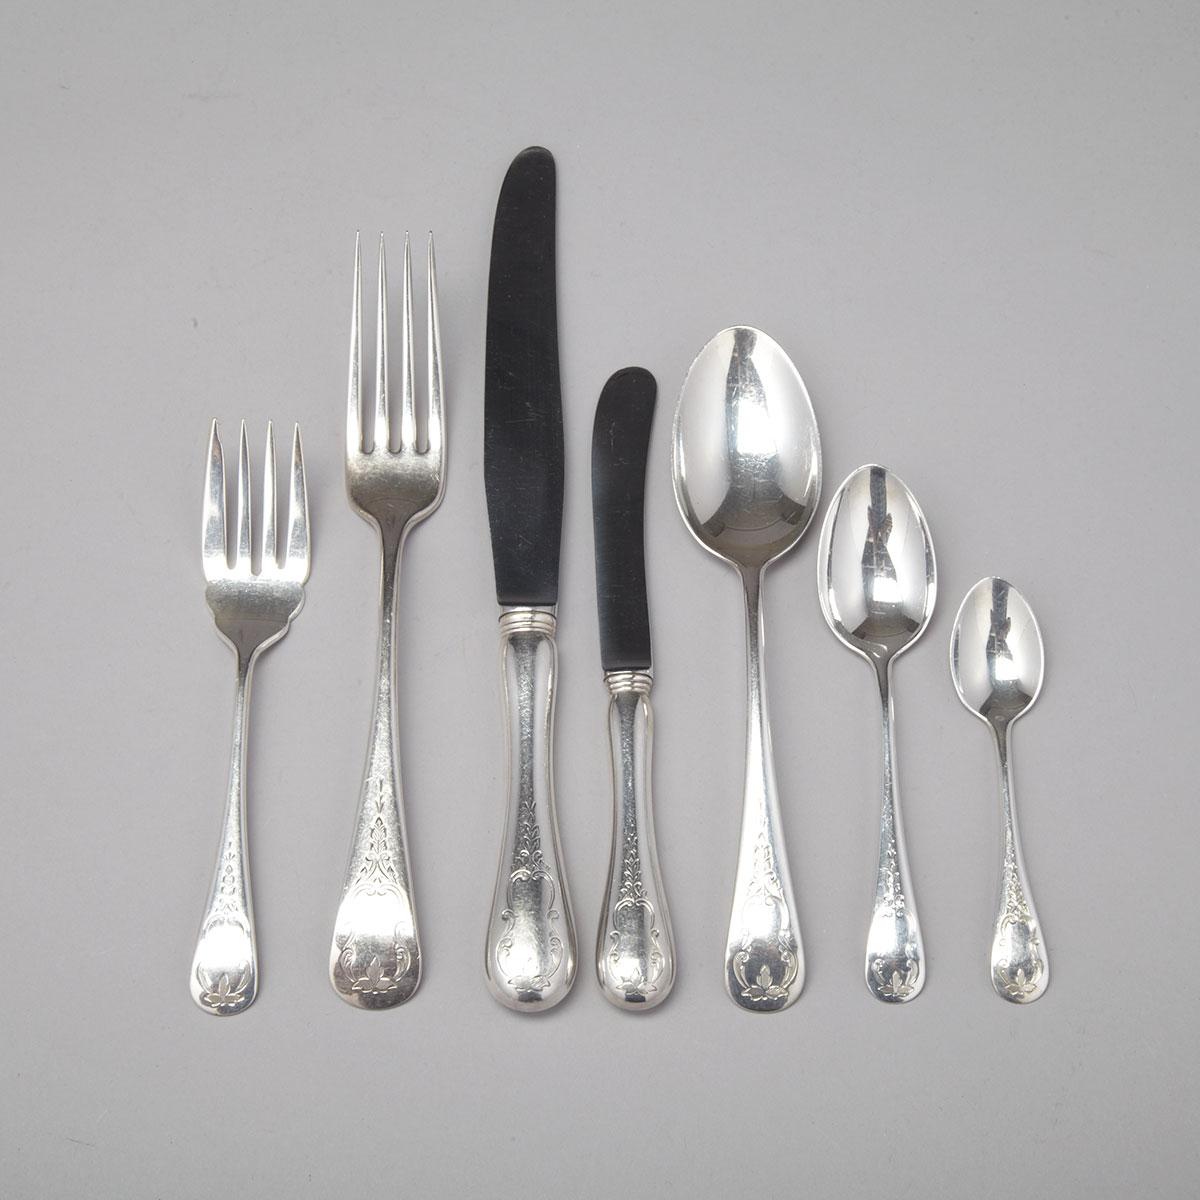 Canadian Silver ‘Brentwood’ Pattern Flatware Service, Henry Birks & Sons, Montreal, Que., 20th century